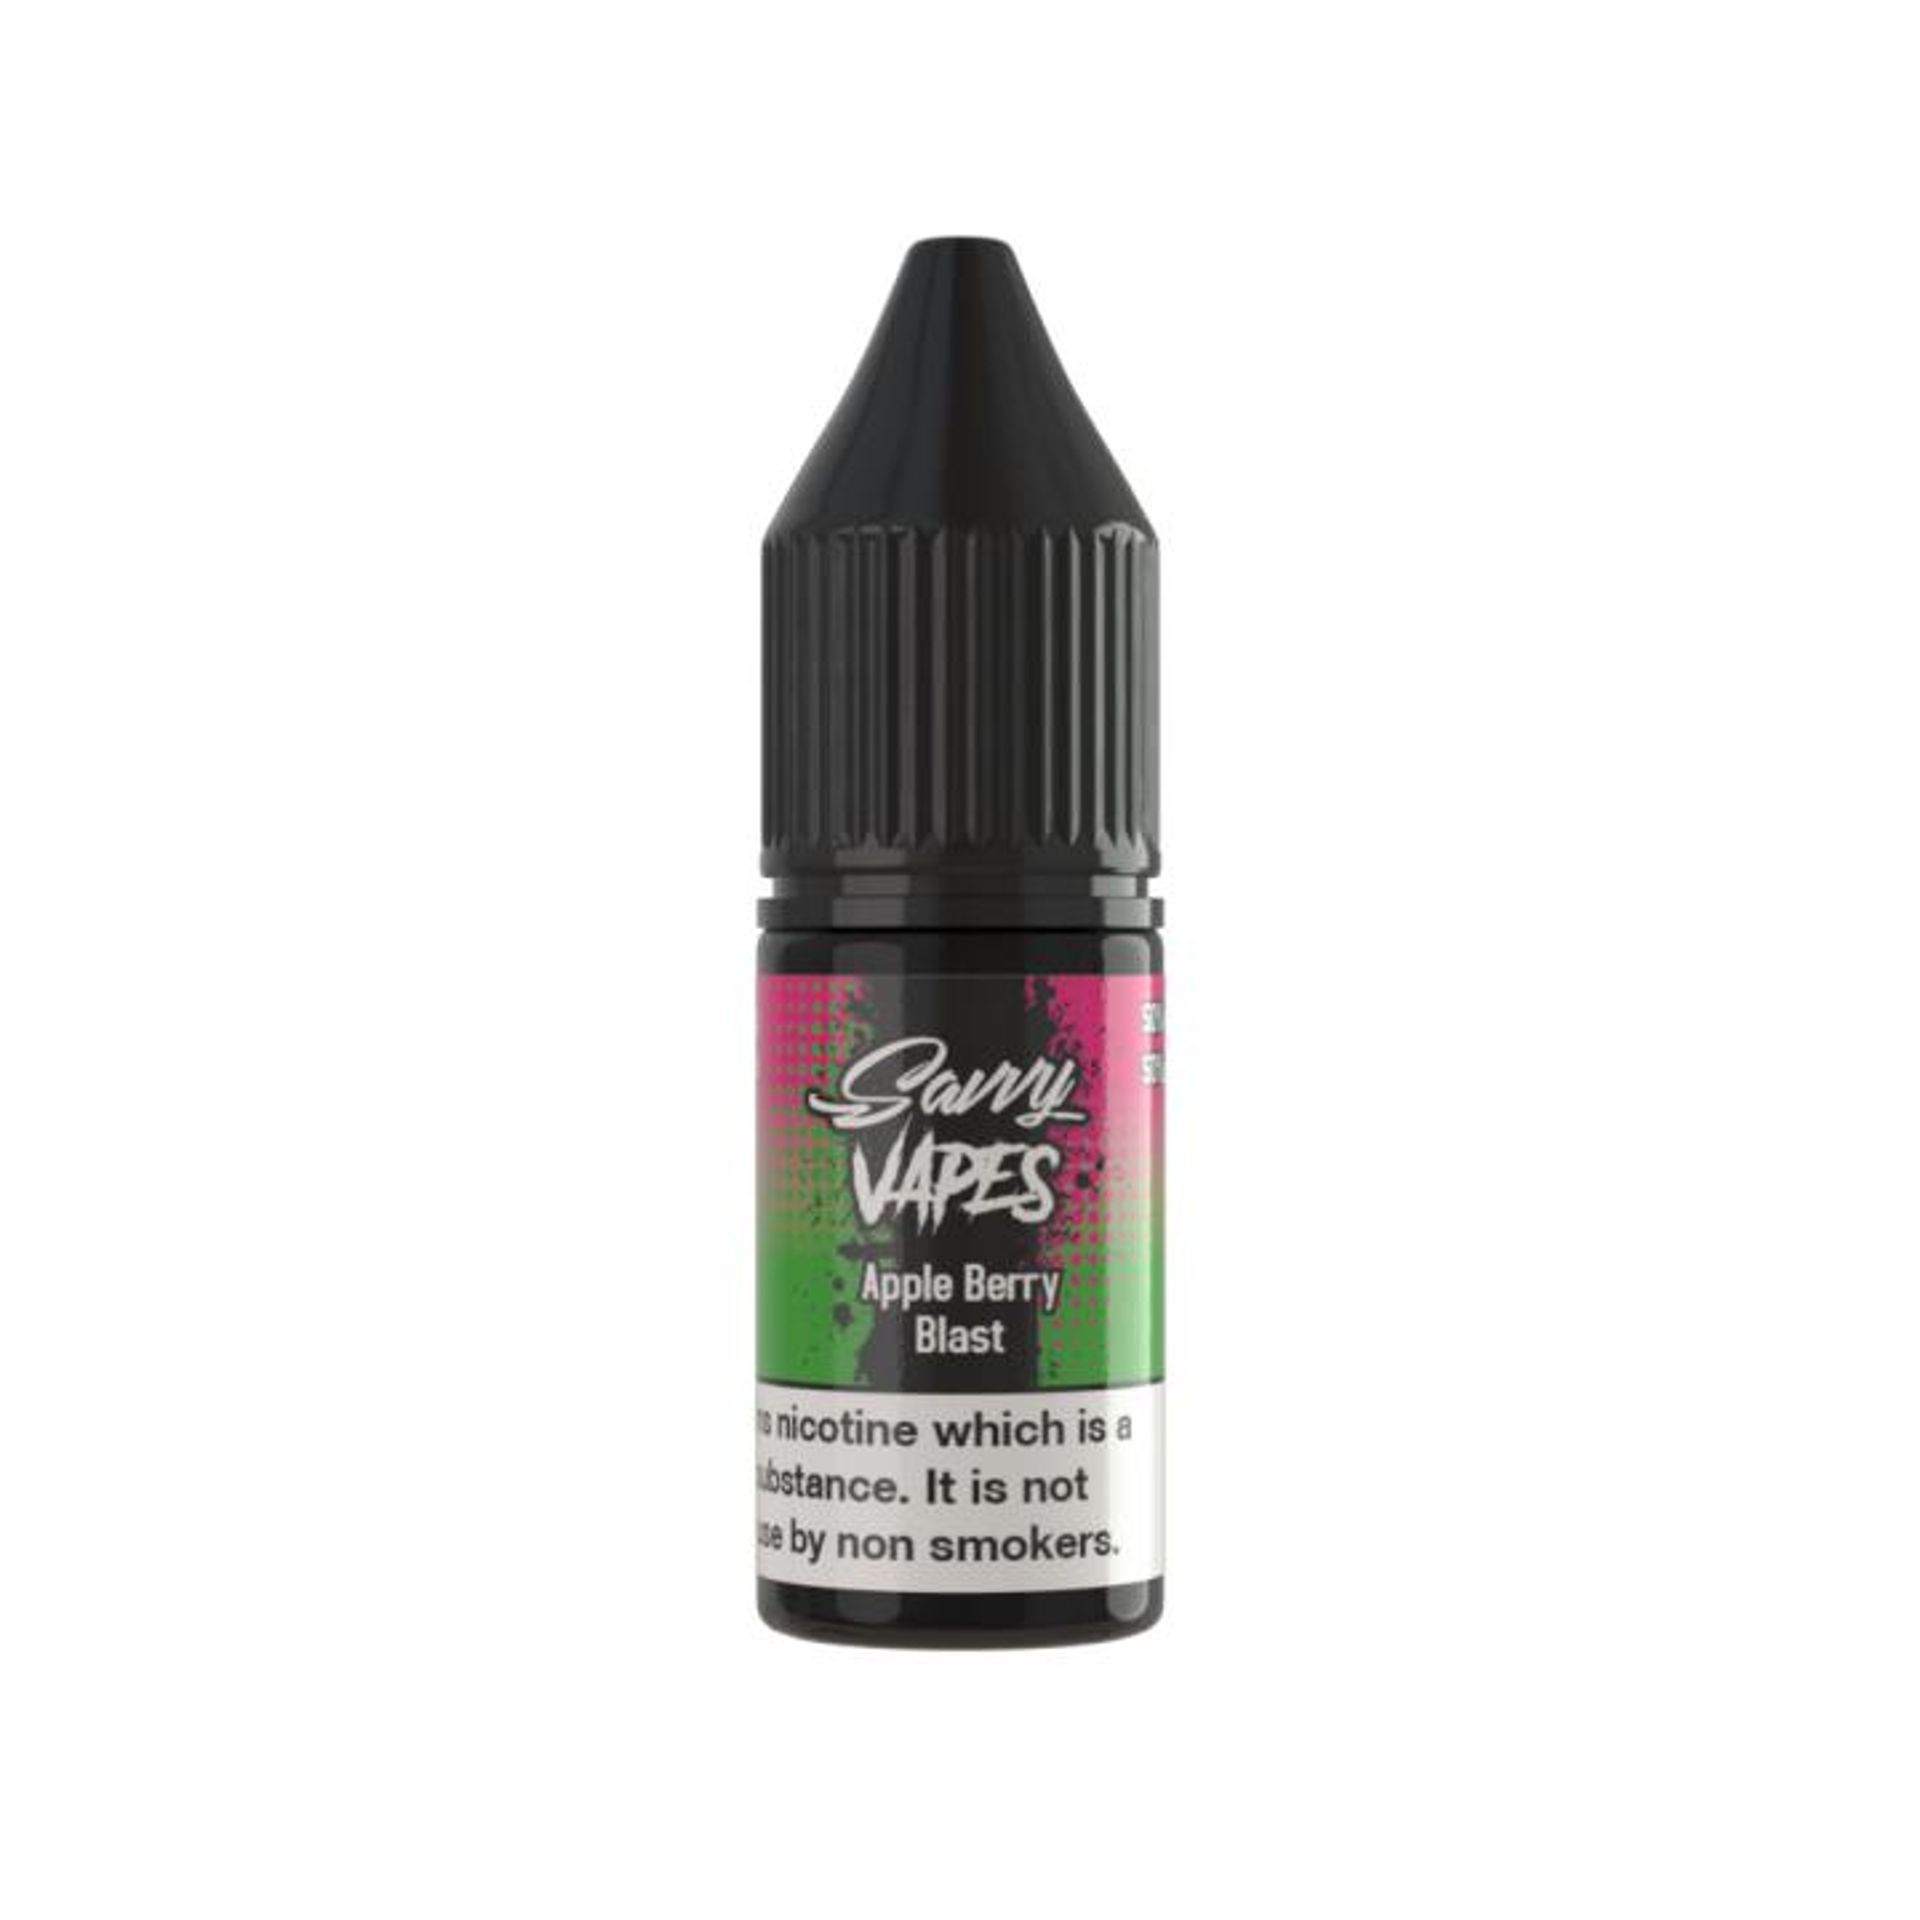 Image of Apple Berry Blast by Savvy Vapes